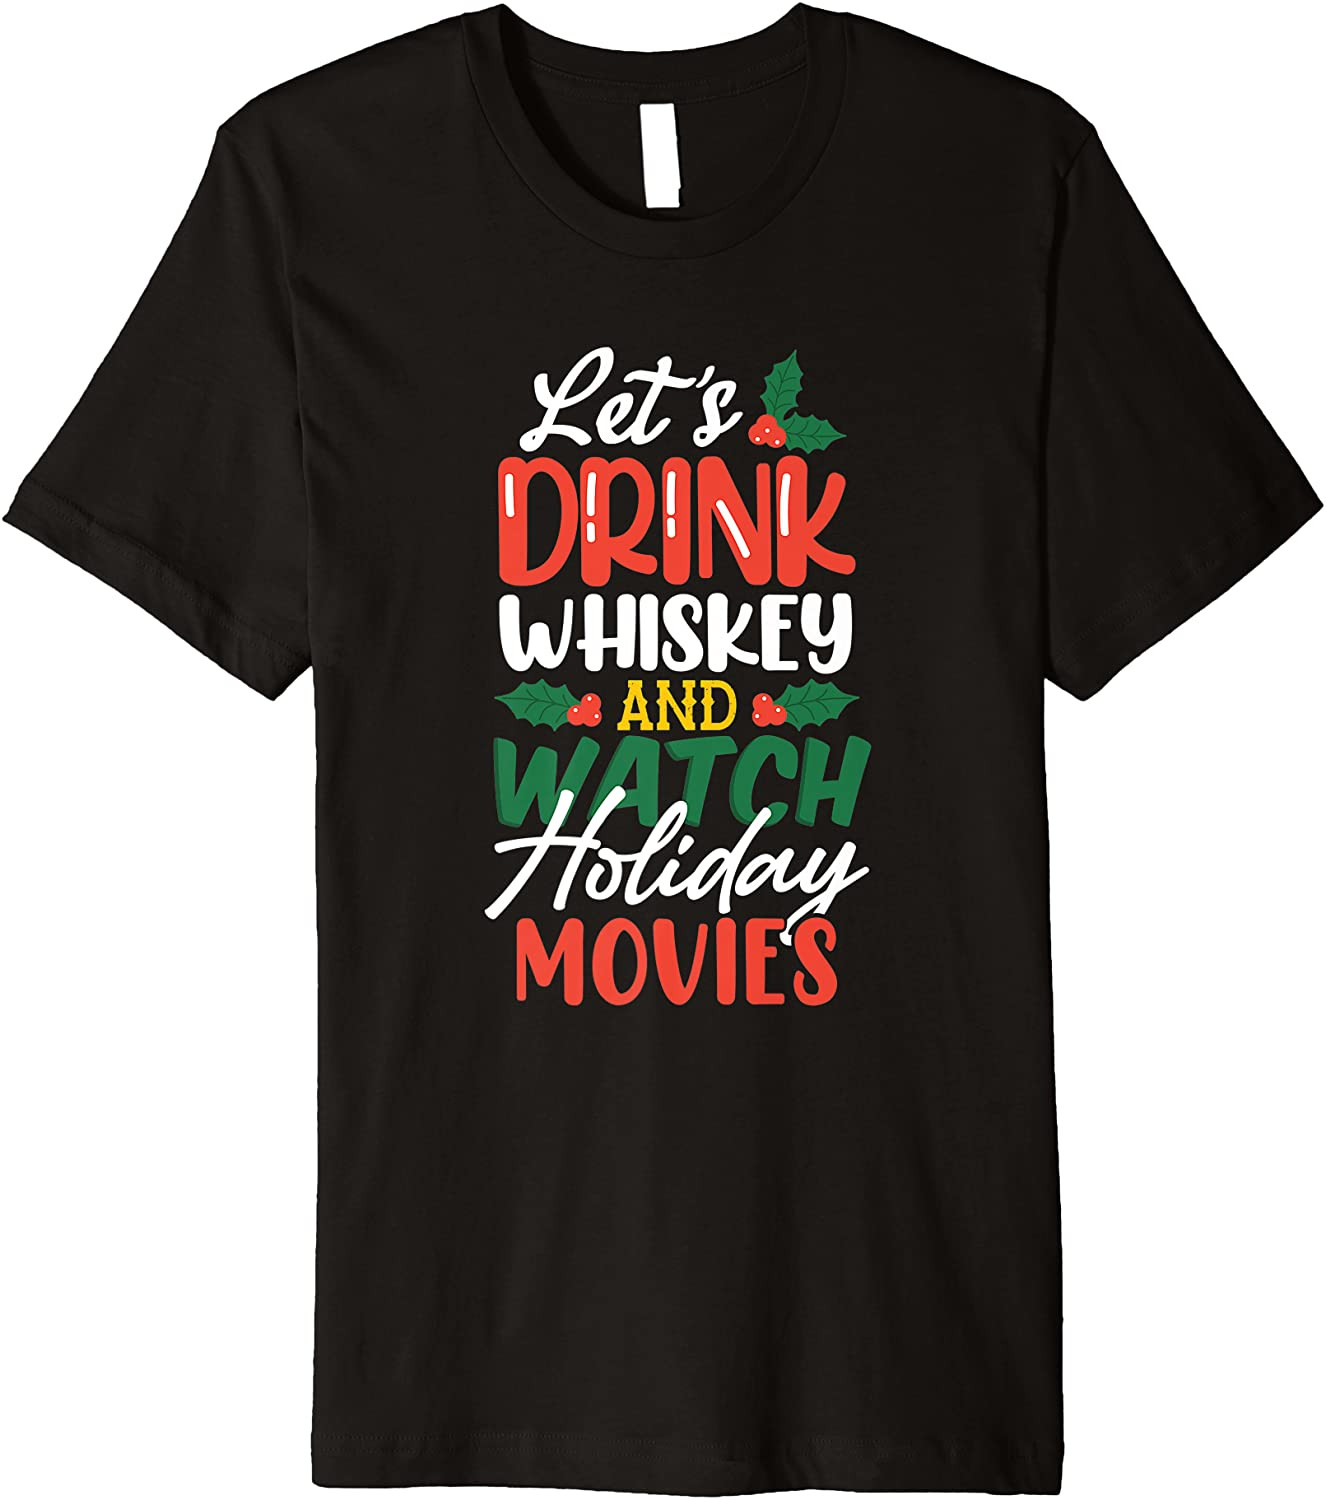 Let's Drink Whiskey And Watch Holiday Movies T-Shirt